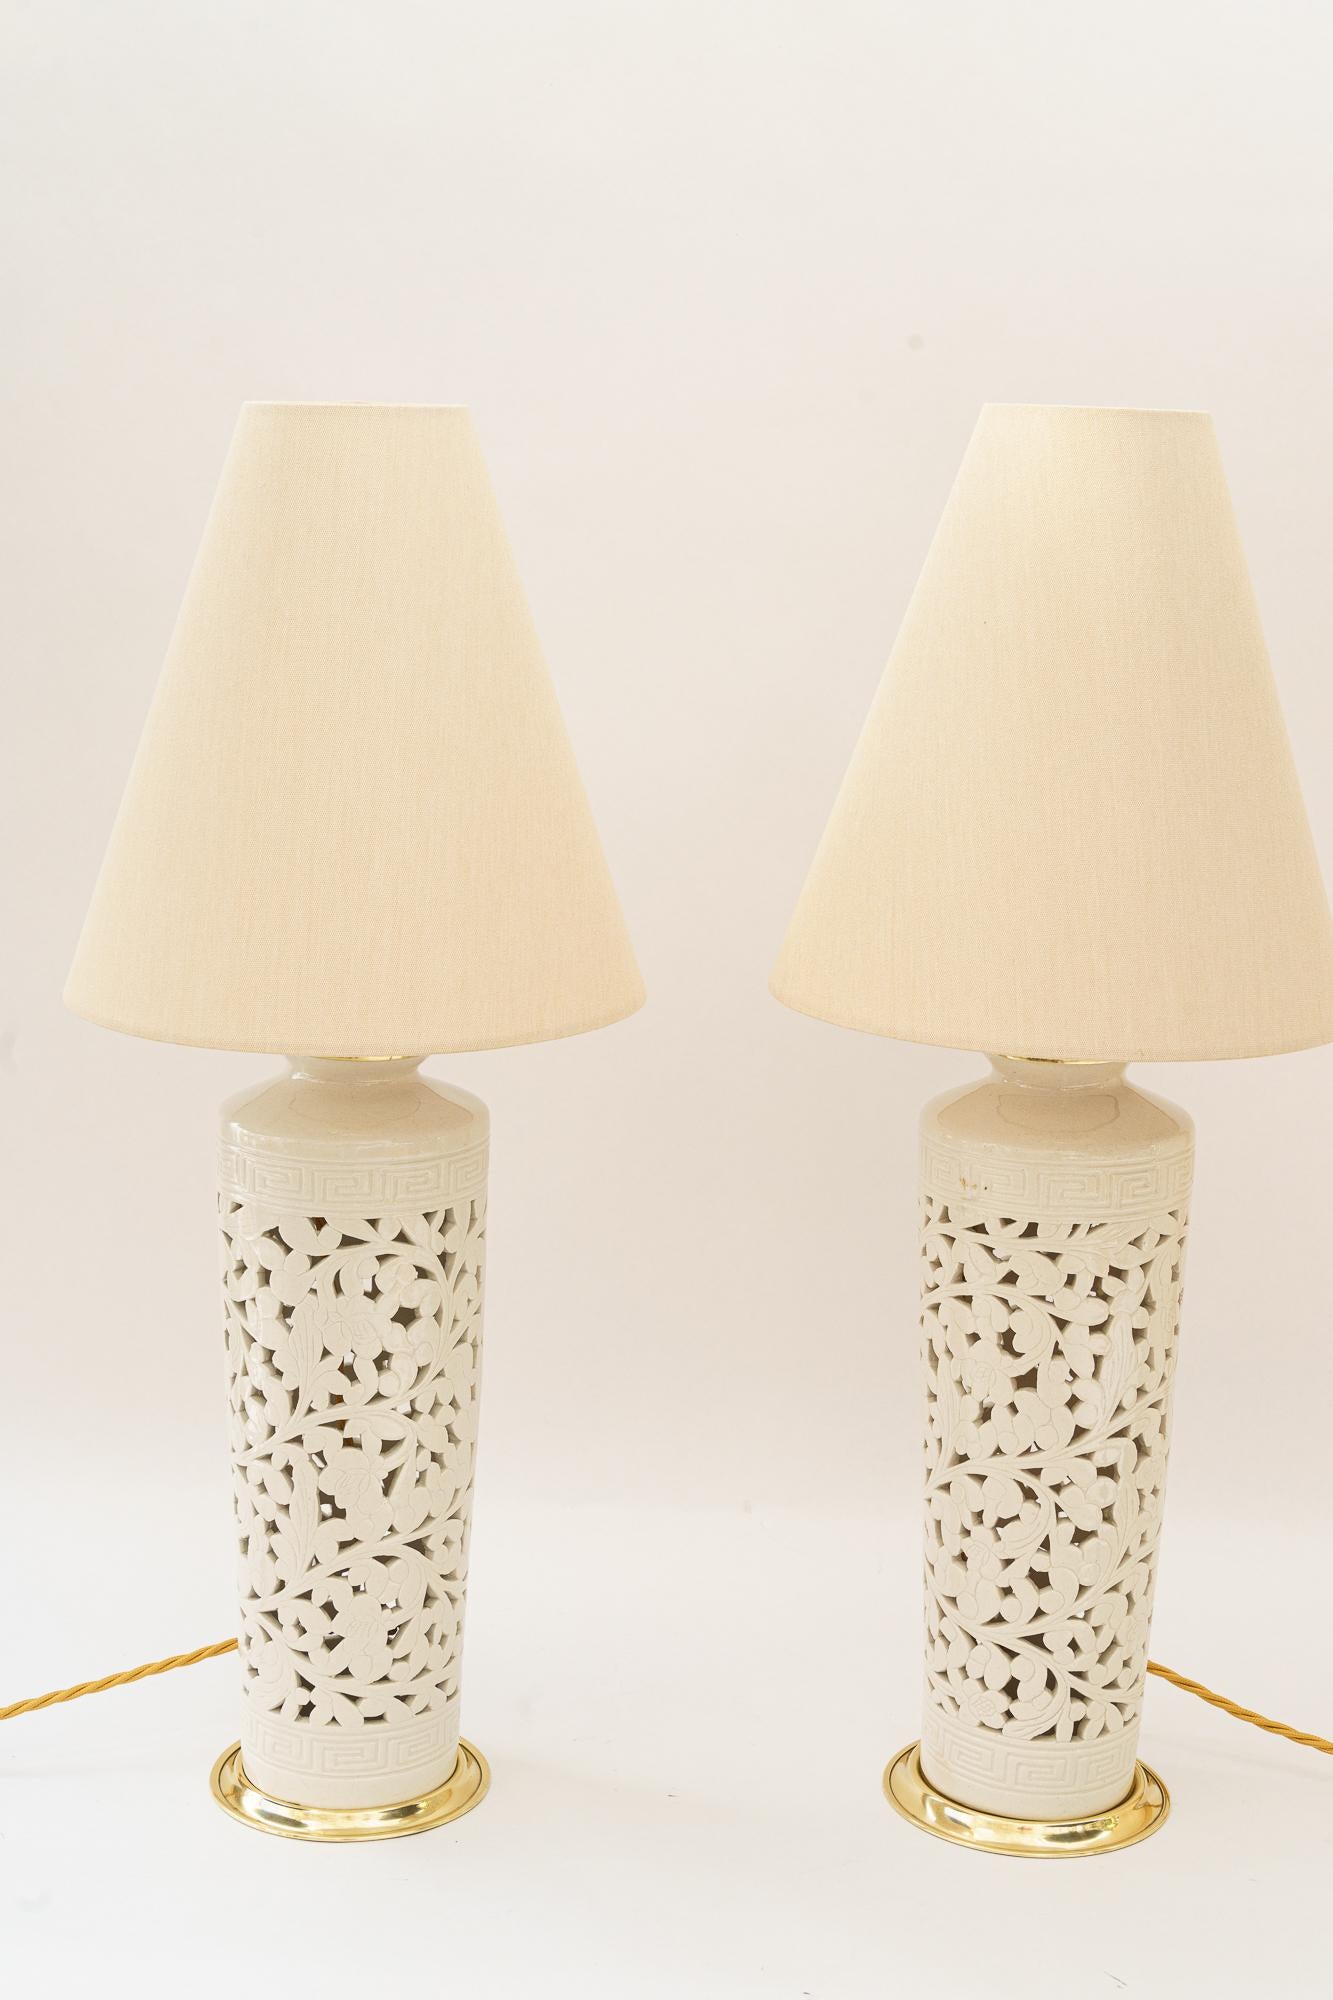 2 Big ceramic table lamps vienna around 1950s
Original condition
The shades are replaced ( new )